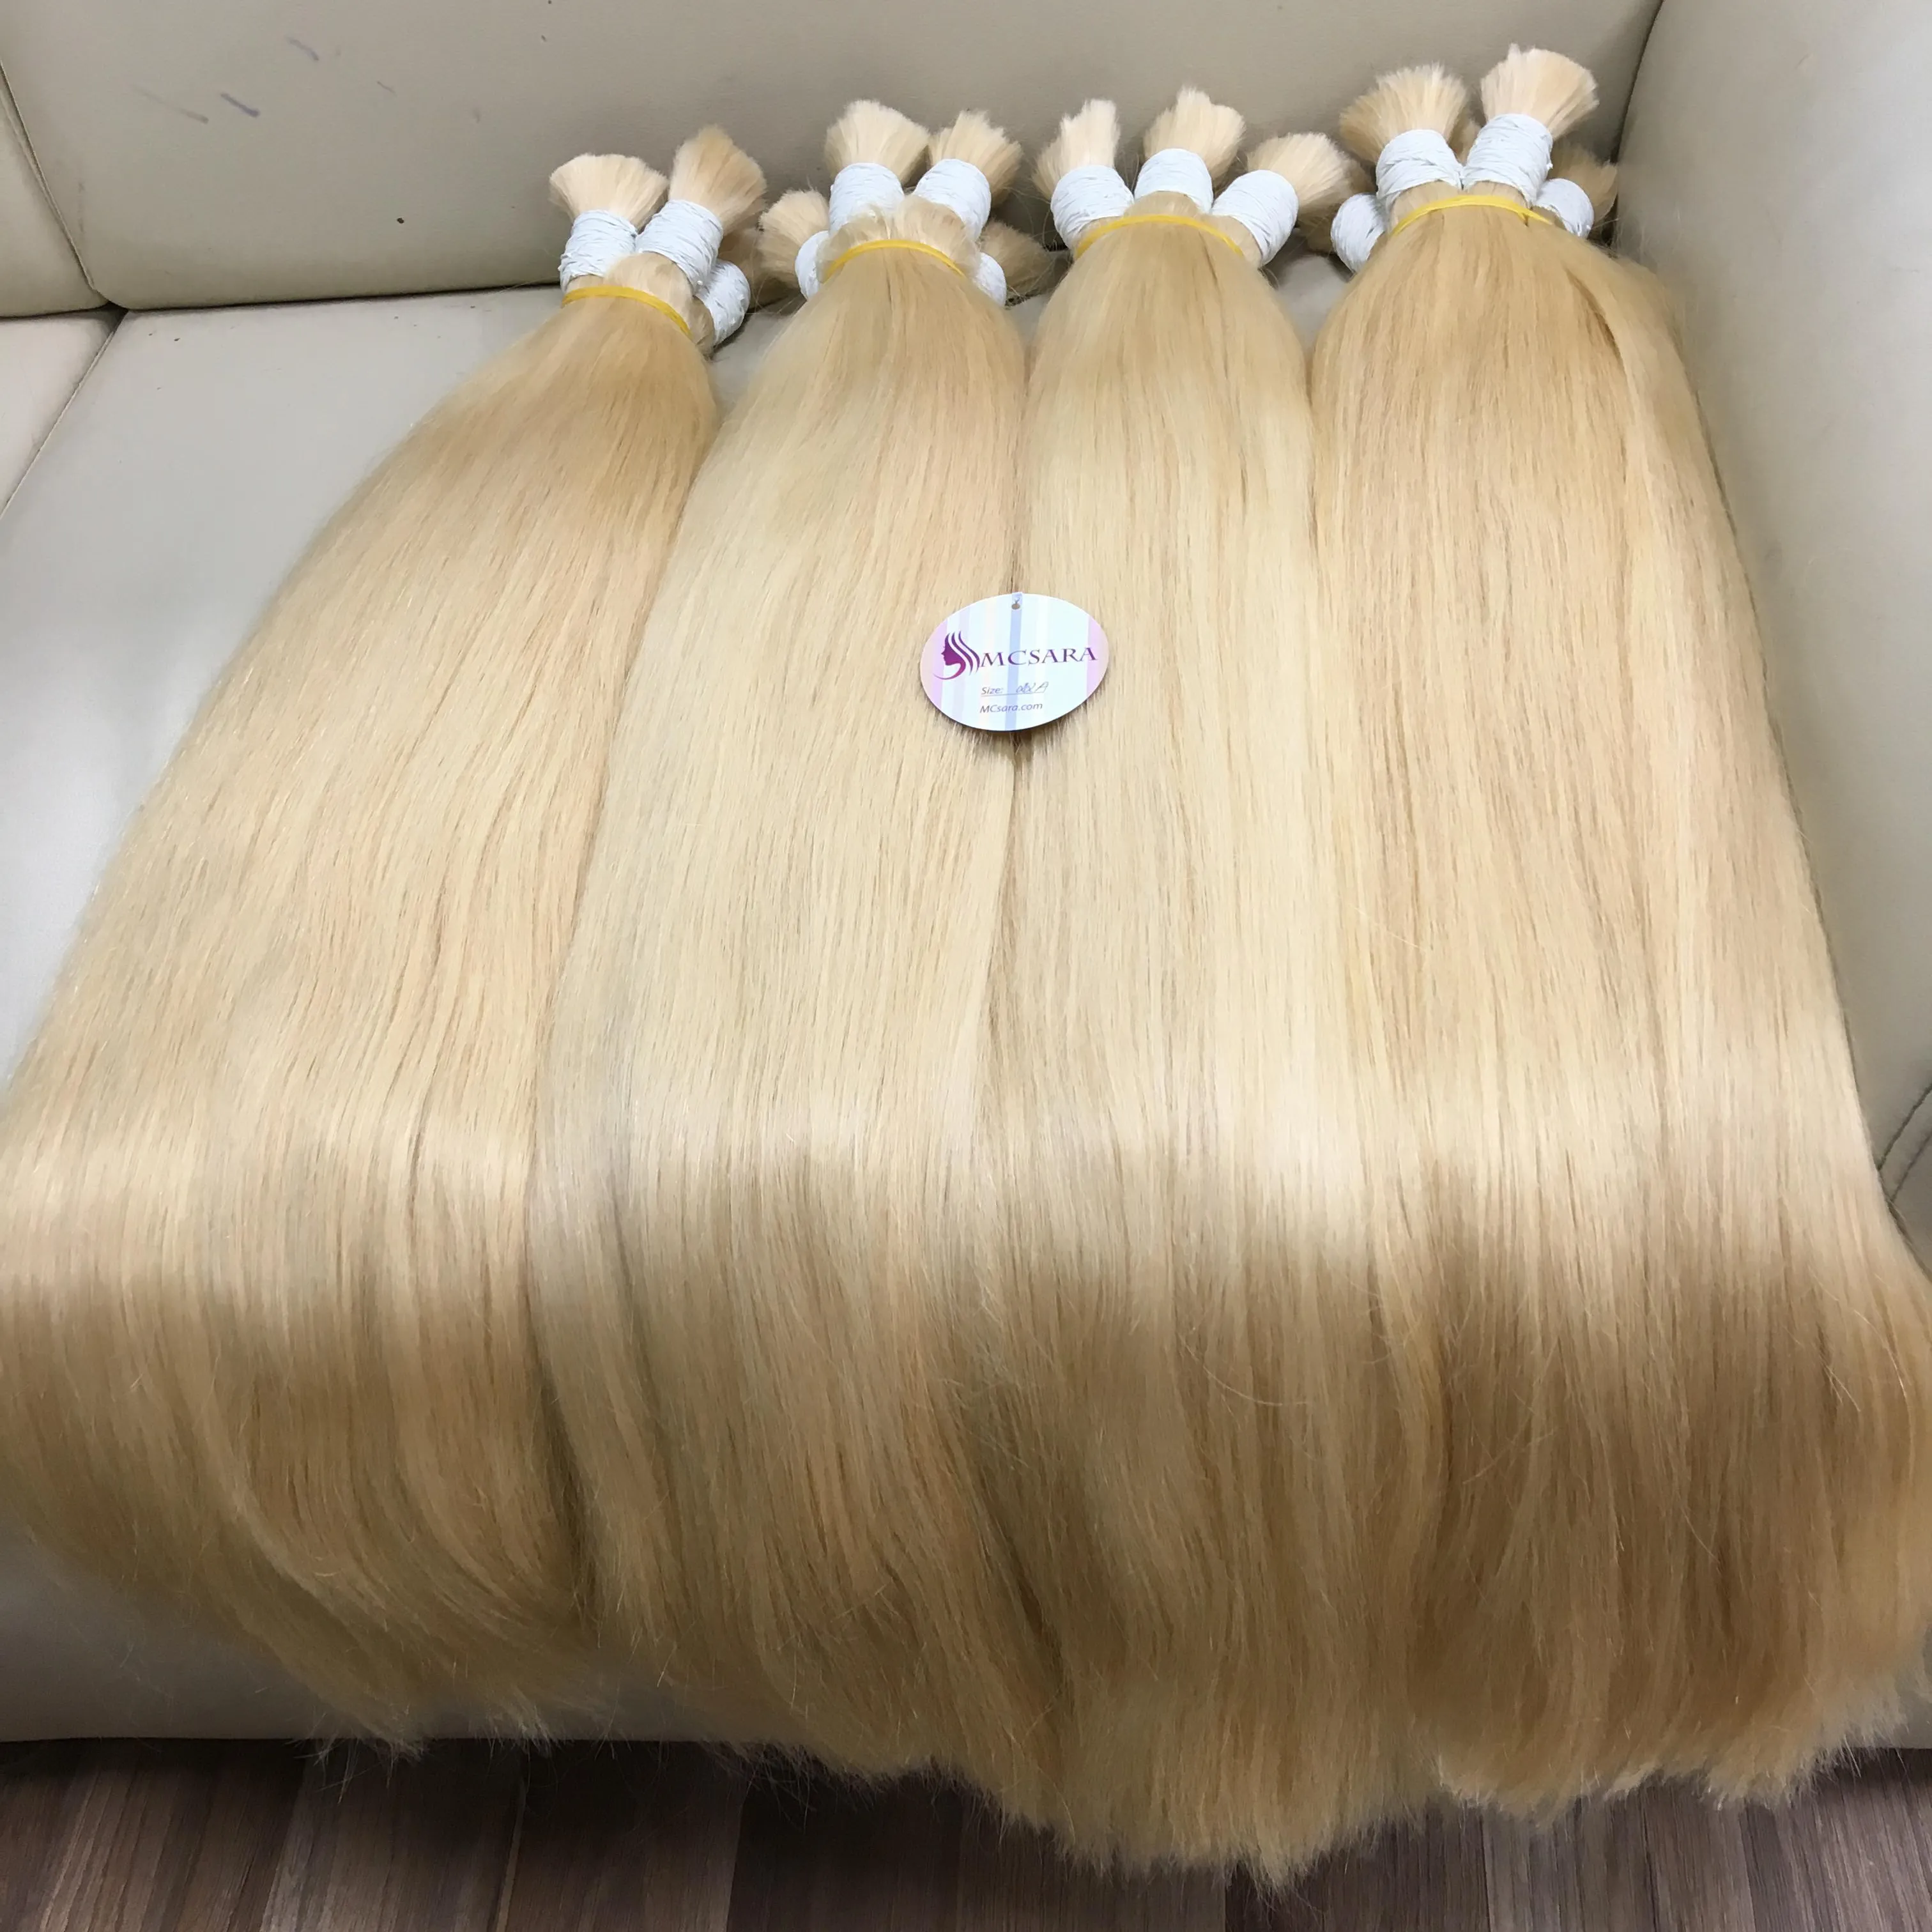 Wholesale Price 40 inches (100cm) Vietnamese Human Hair Wigs Blonde Color Bulk Hair Extension cuticle aligned